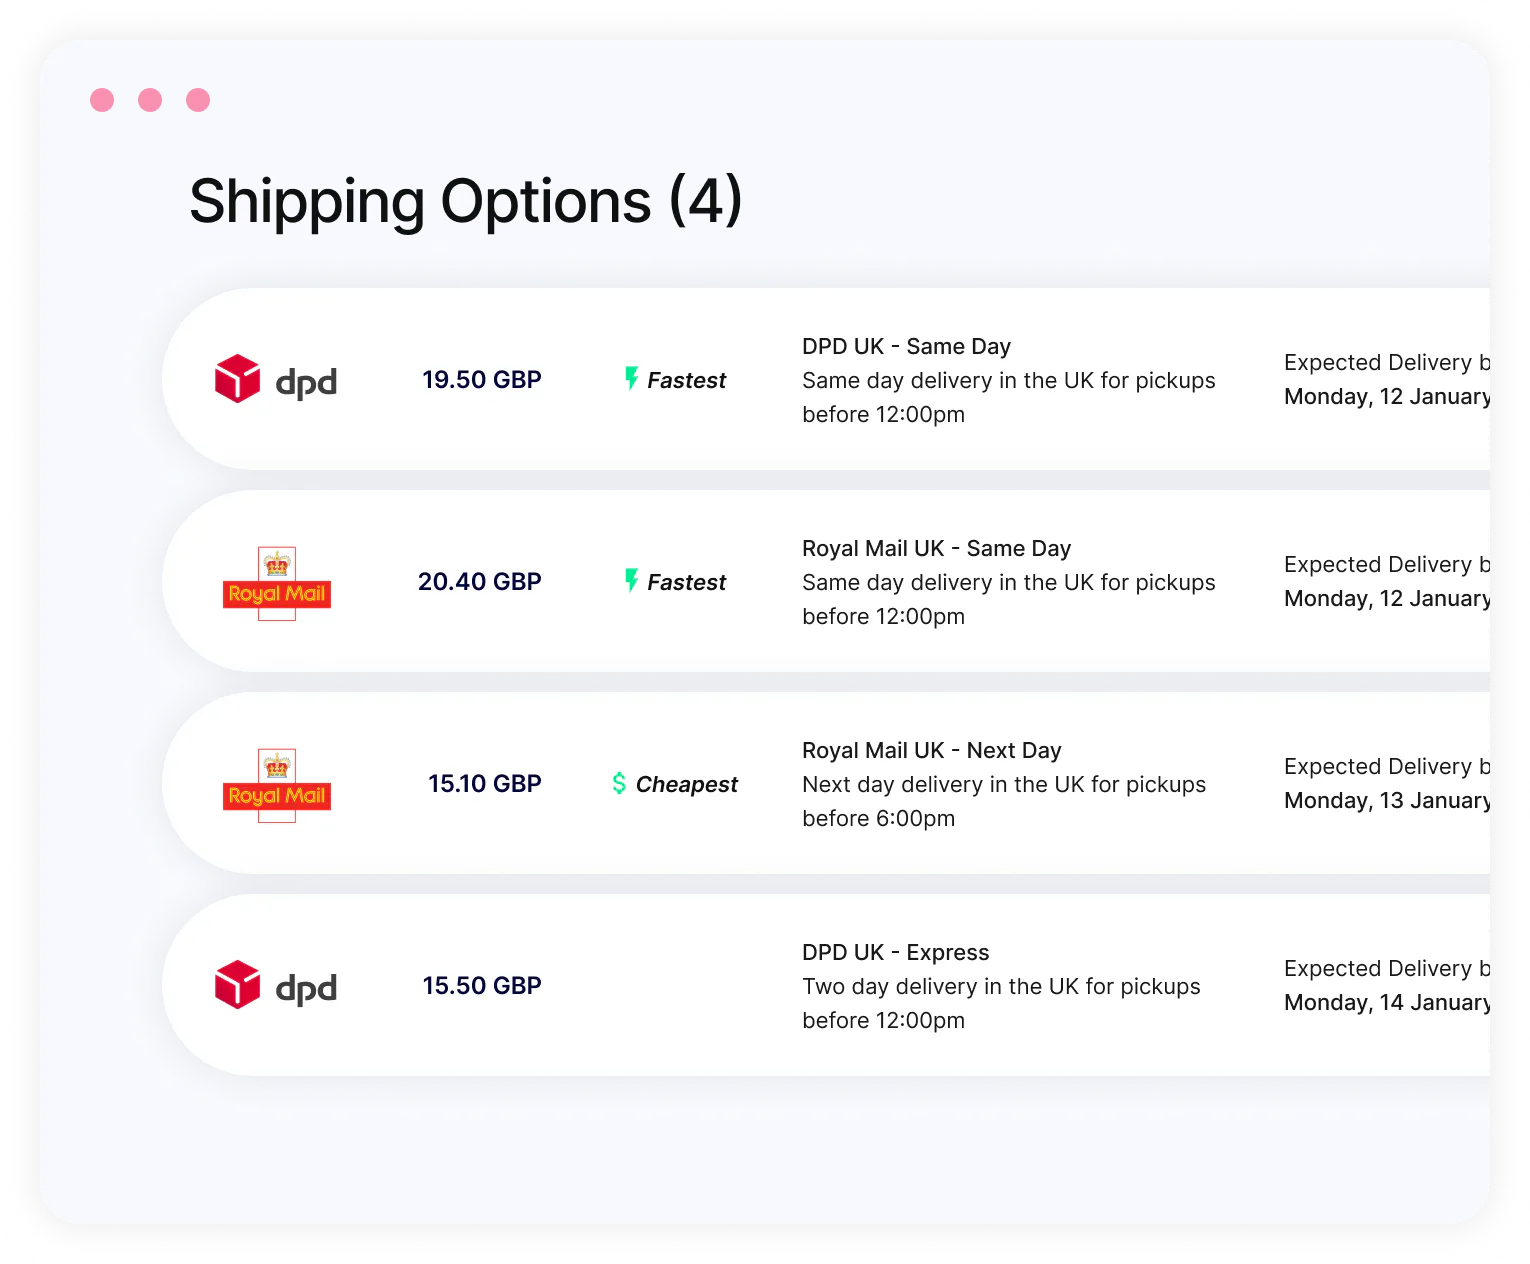 Compare shipping options and prices